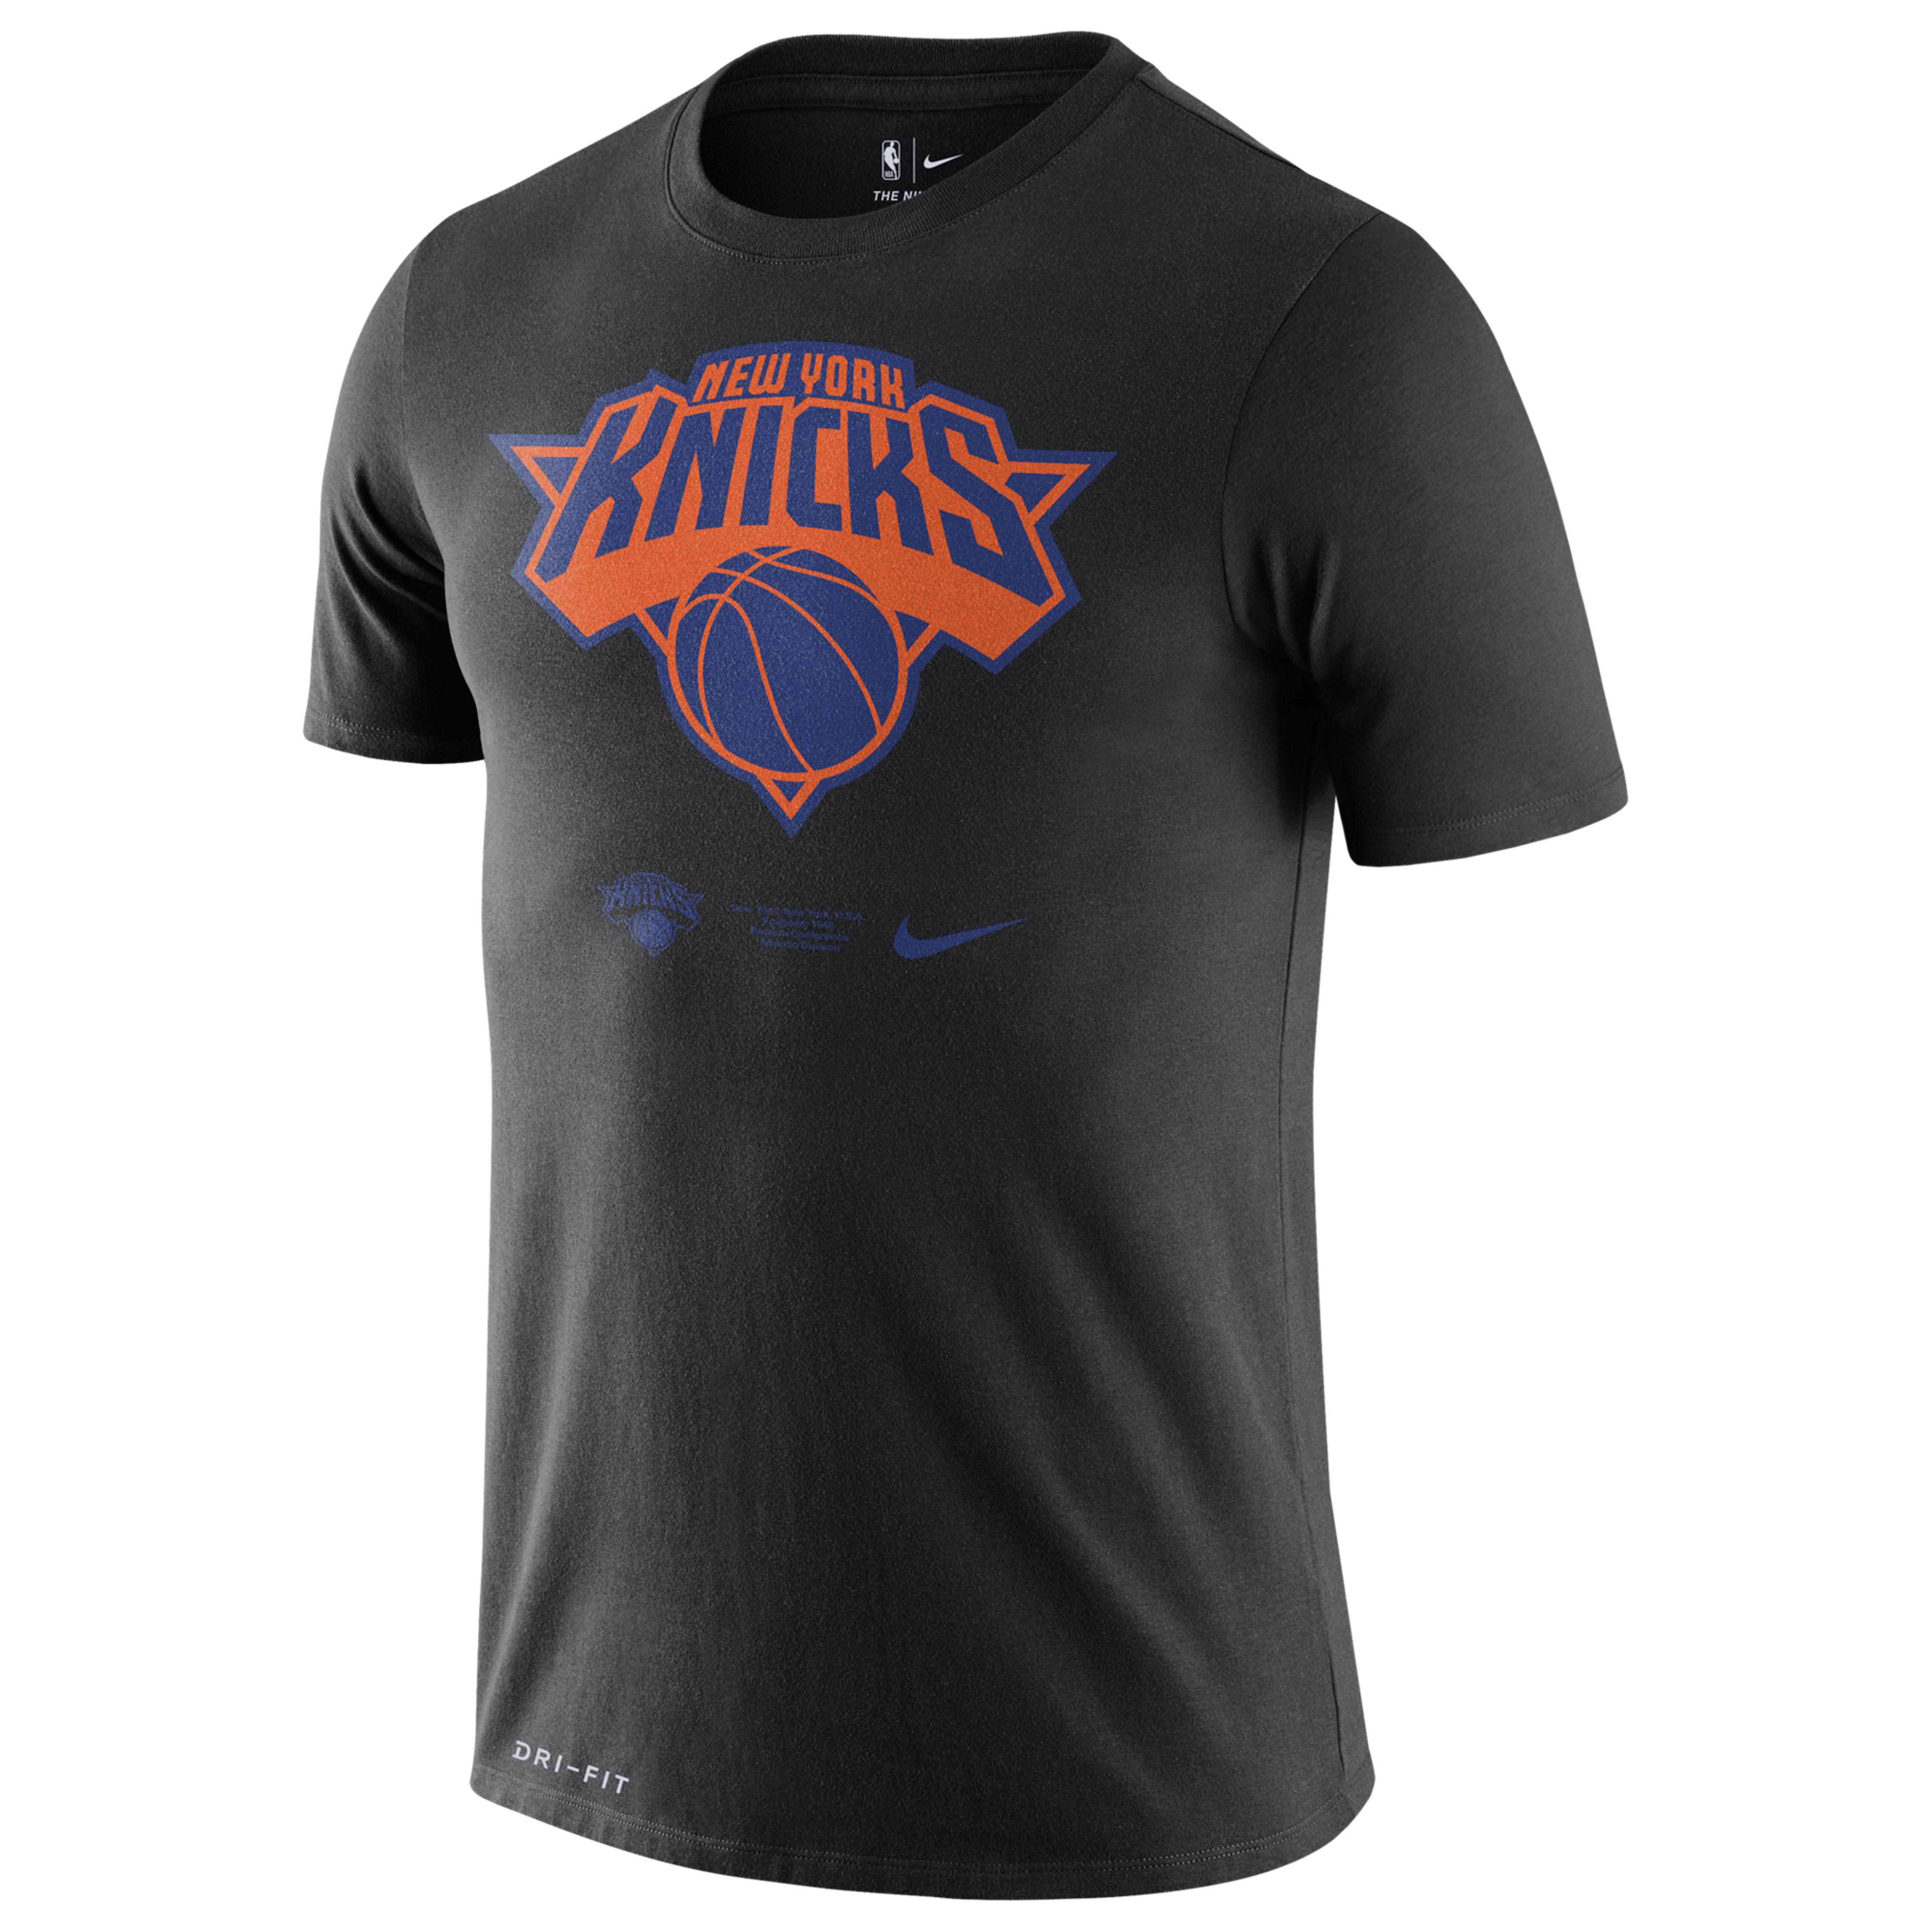 Nike Cotton Nba Team Mantra T-shirt in Black for Men - Lyst